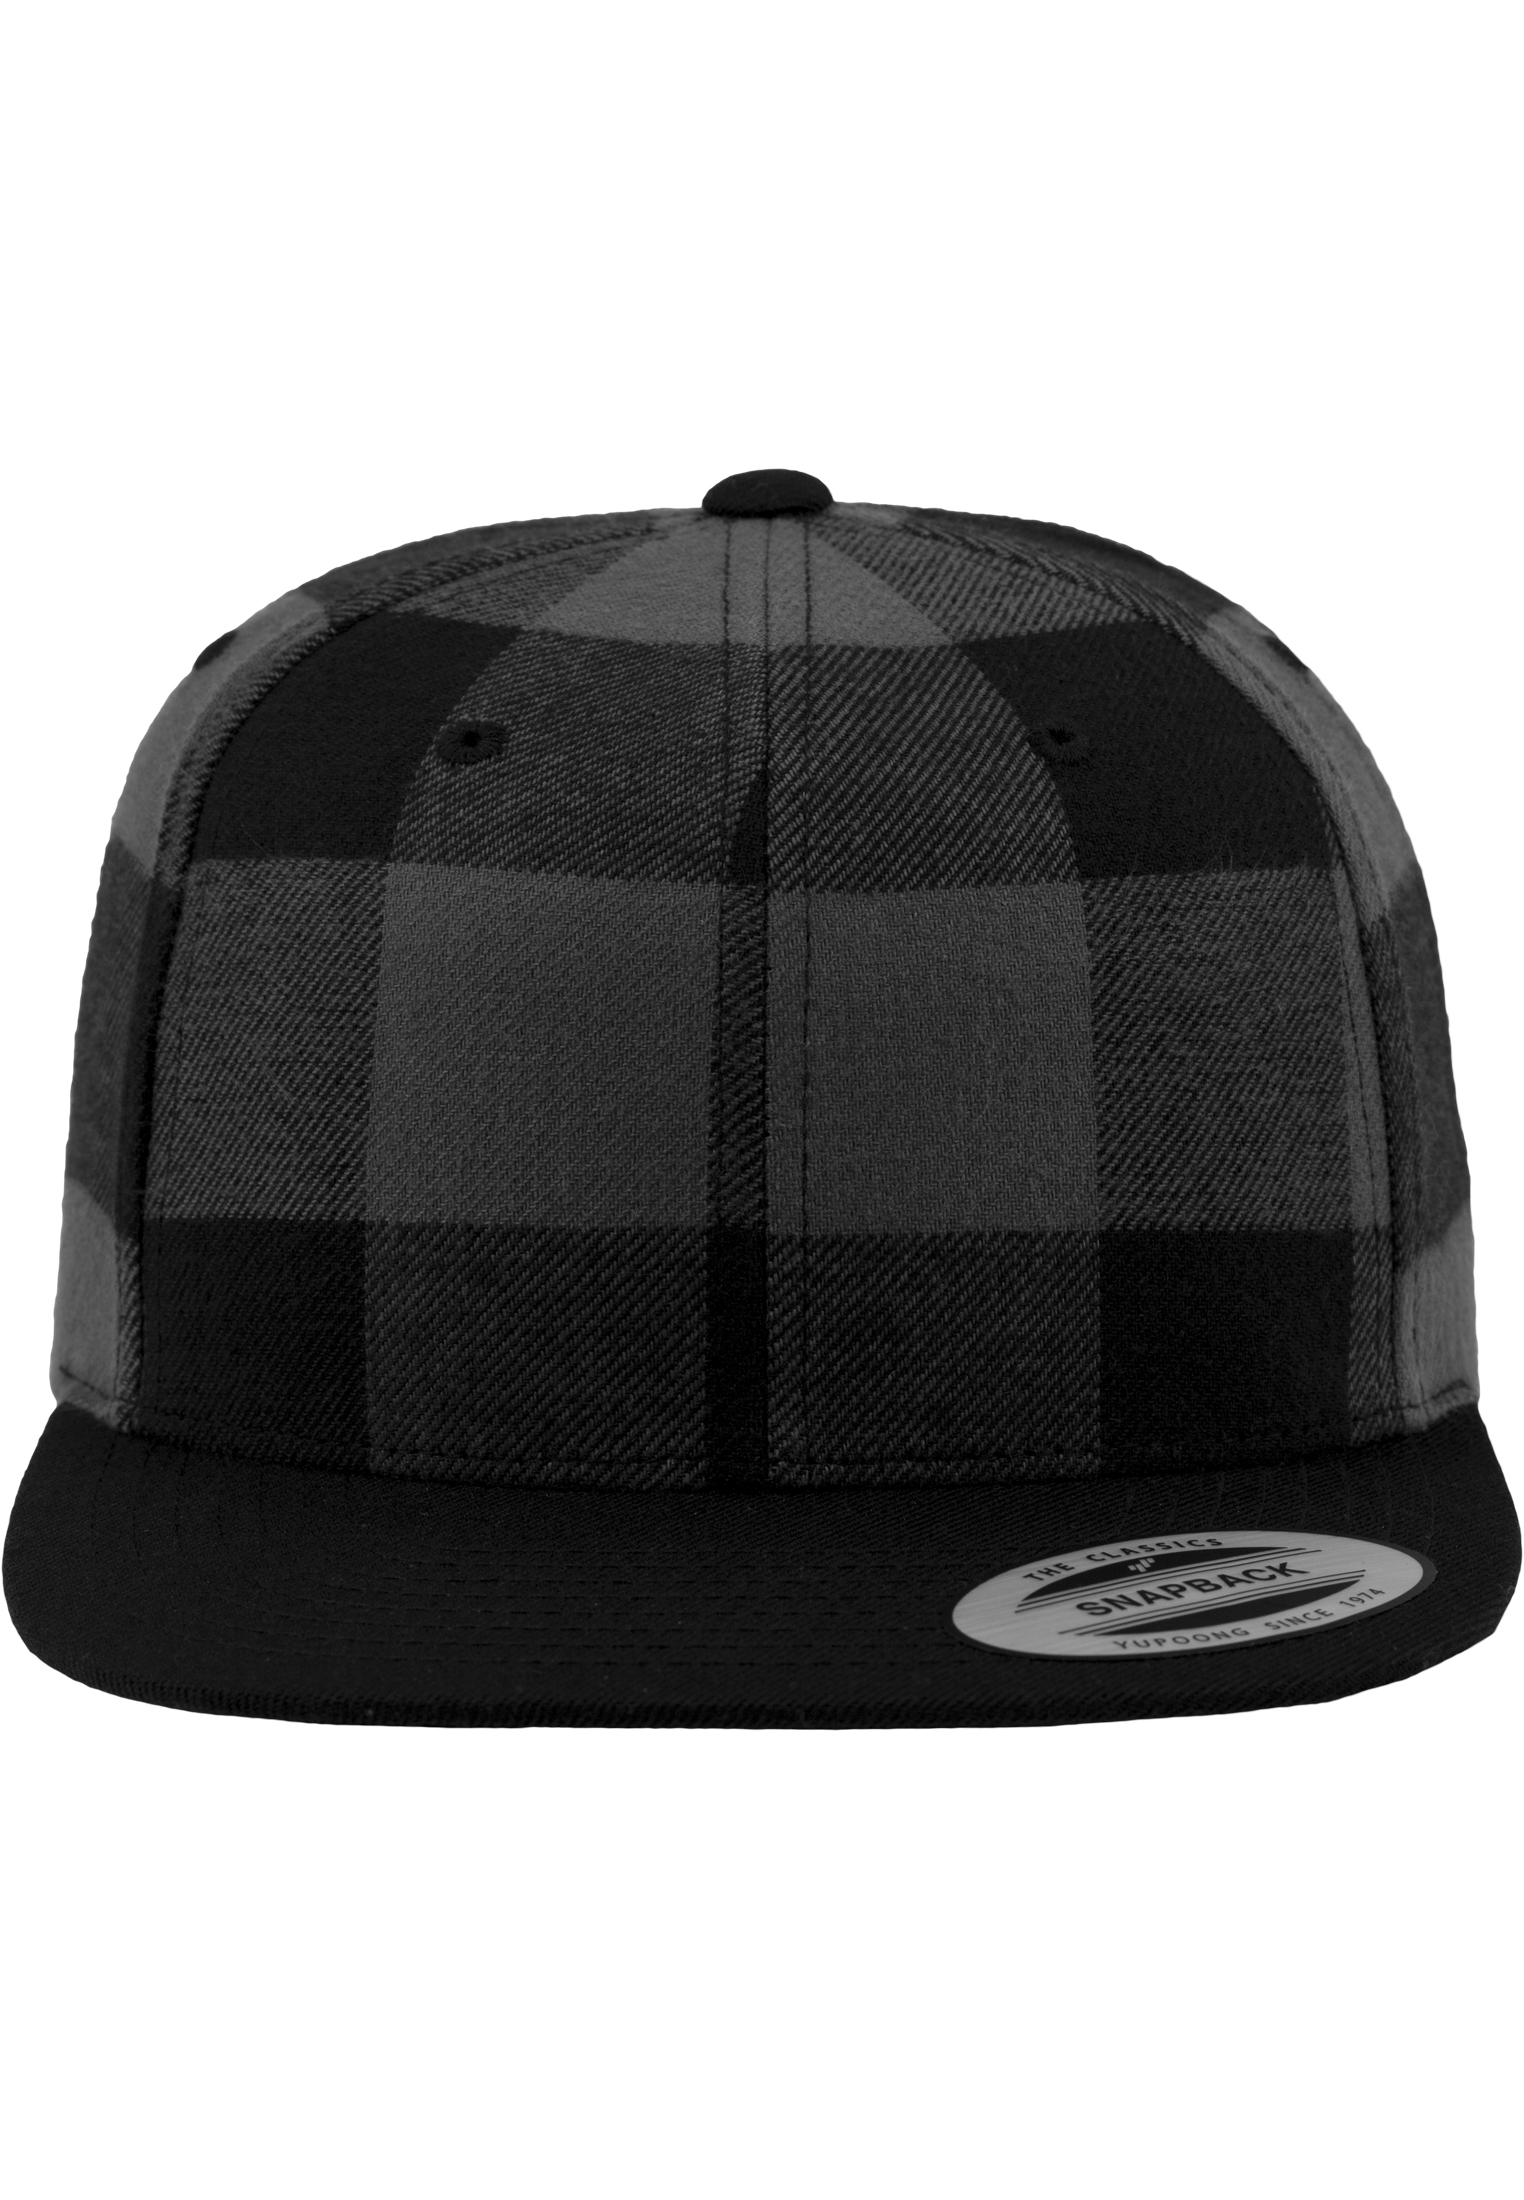 Snapback Checked Flanell Snapback in Farbe blk/cha